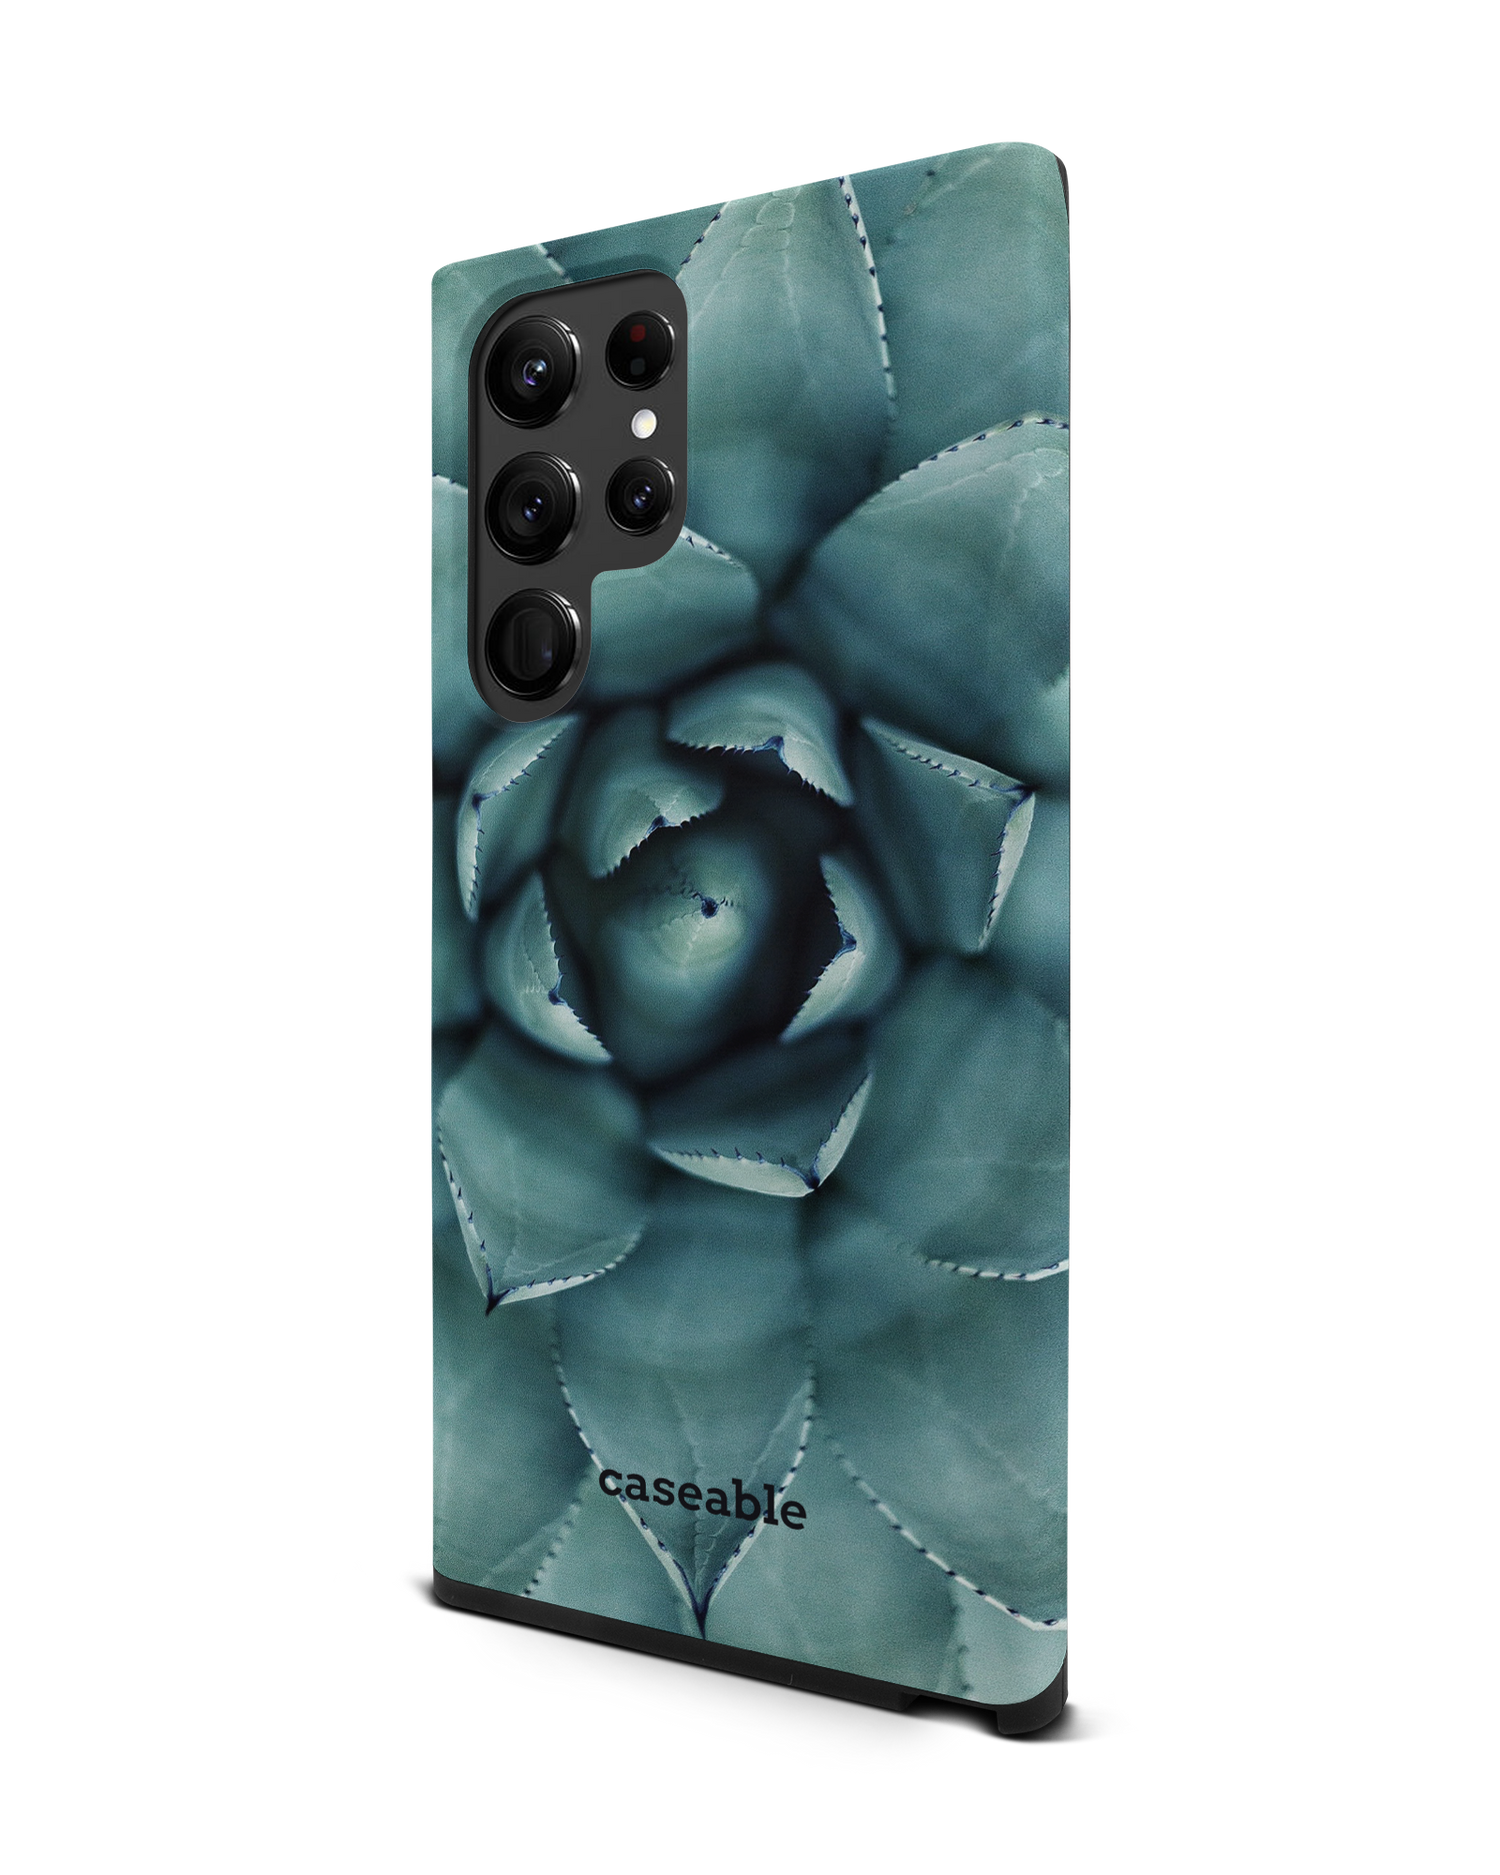 Beautiful Succulent Premium Phone Case Samsung Galaxy S22 Ultra 5G: View from the right side